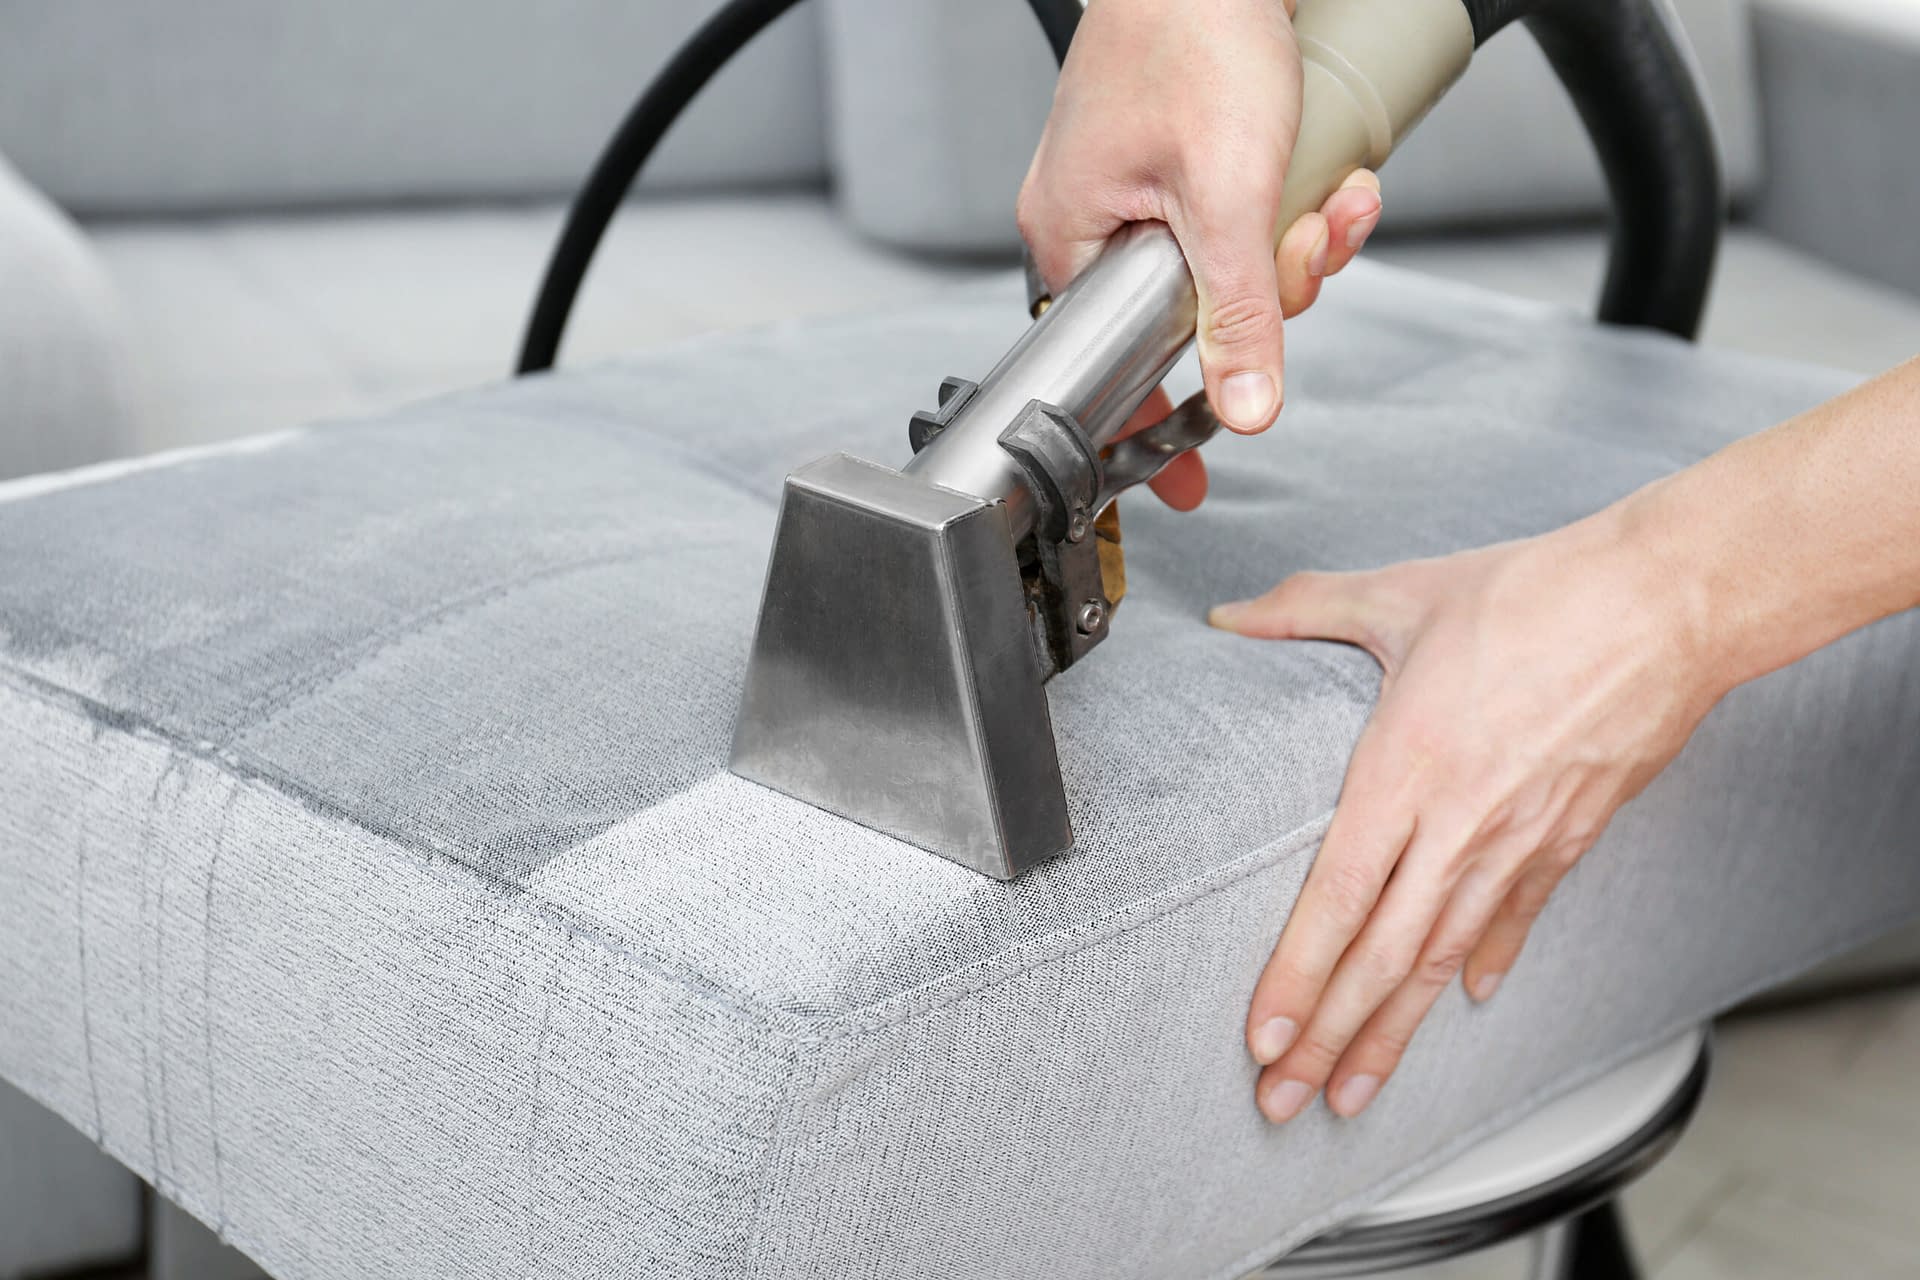 Furniture and Upholstery Cleaning | AmSteam Edmonton